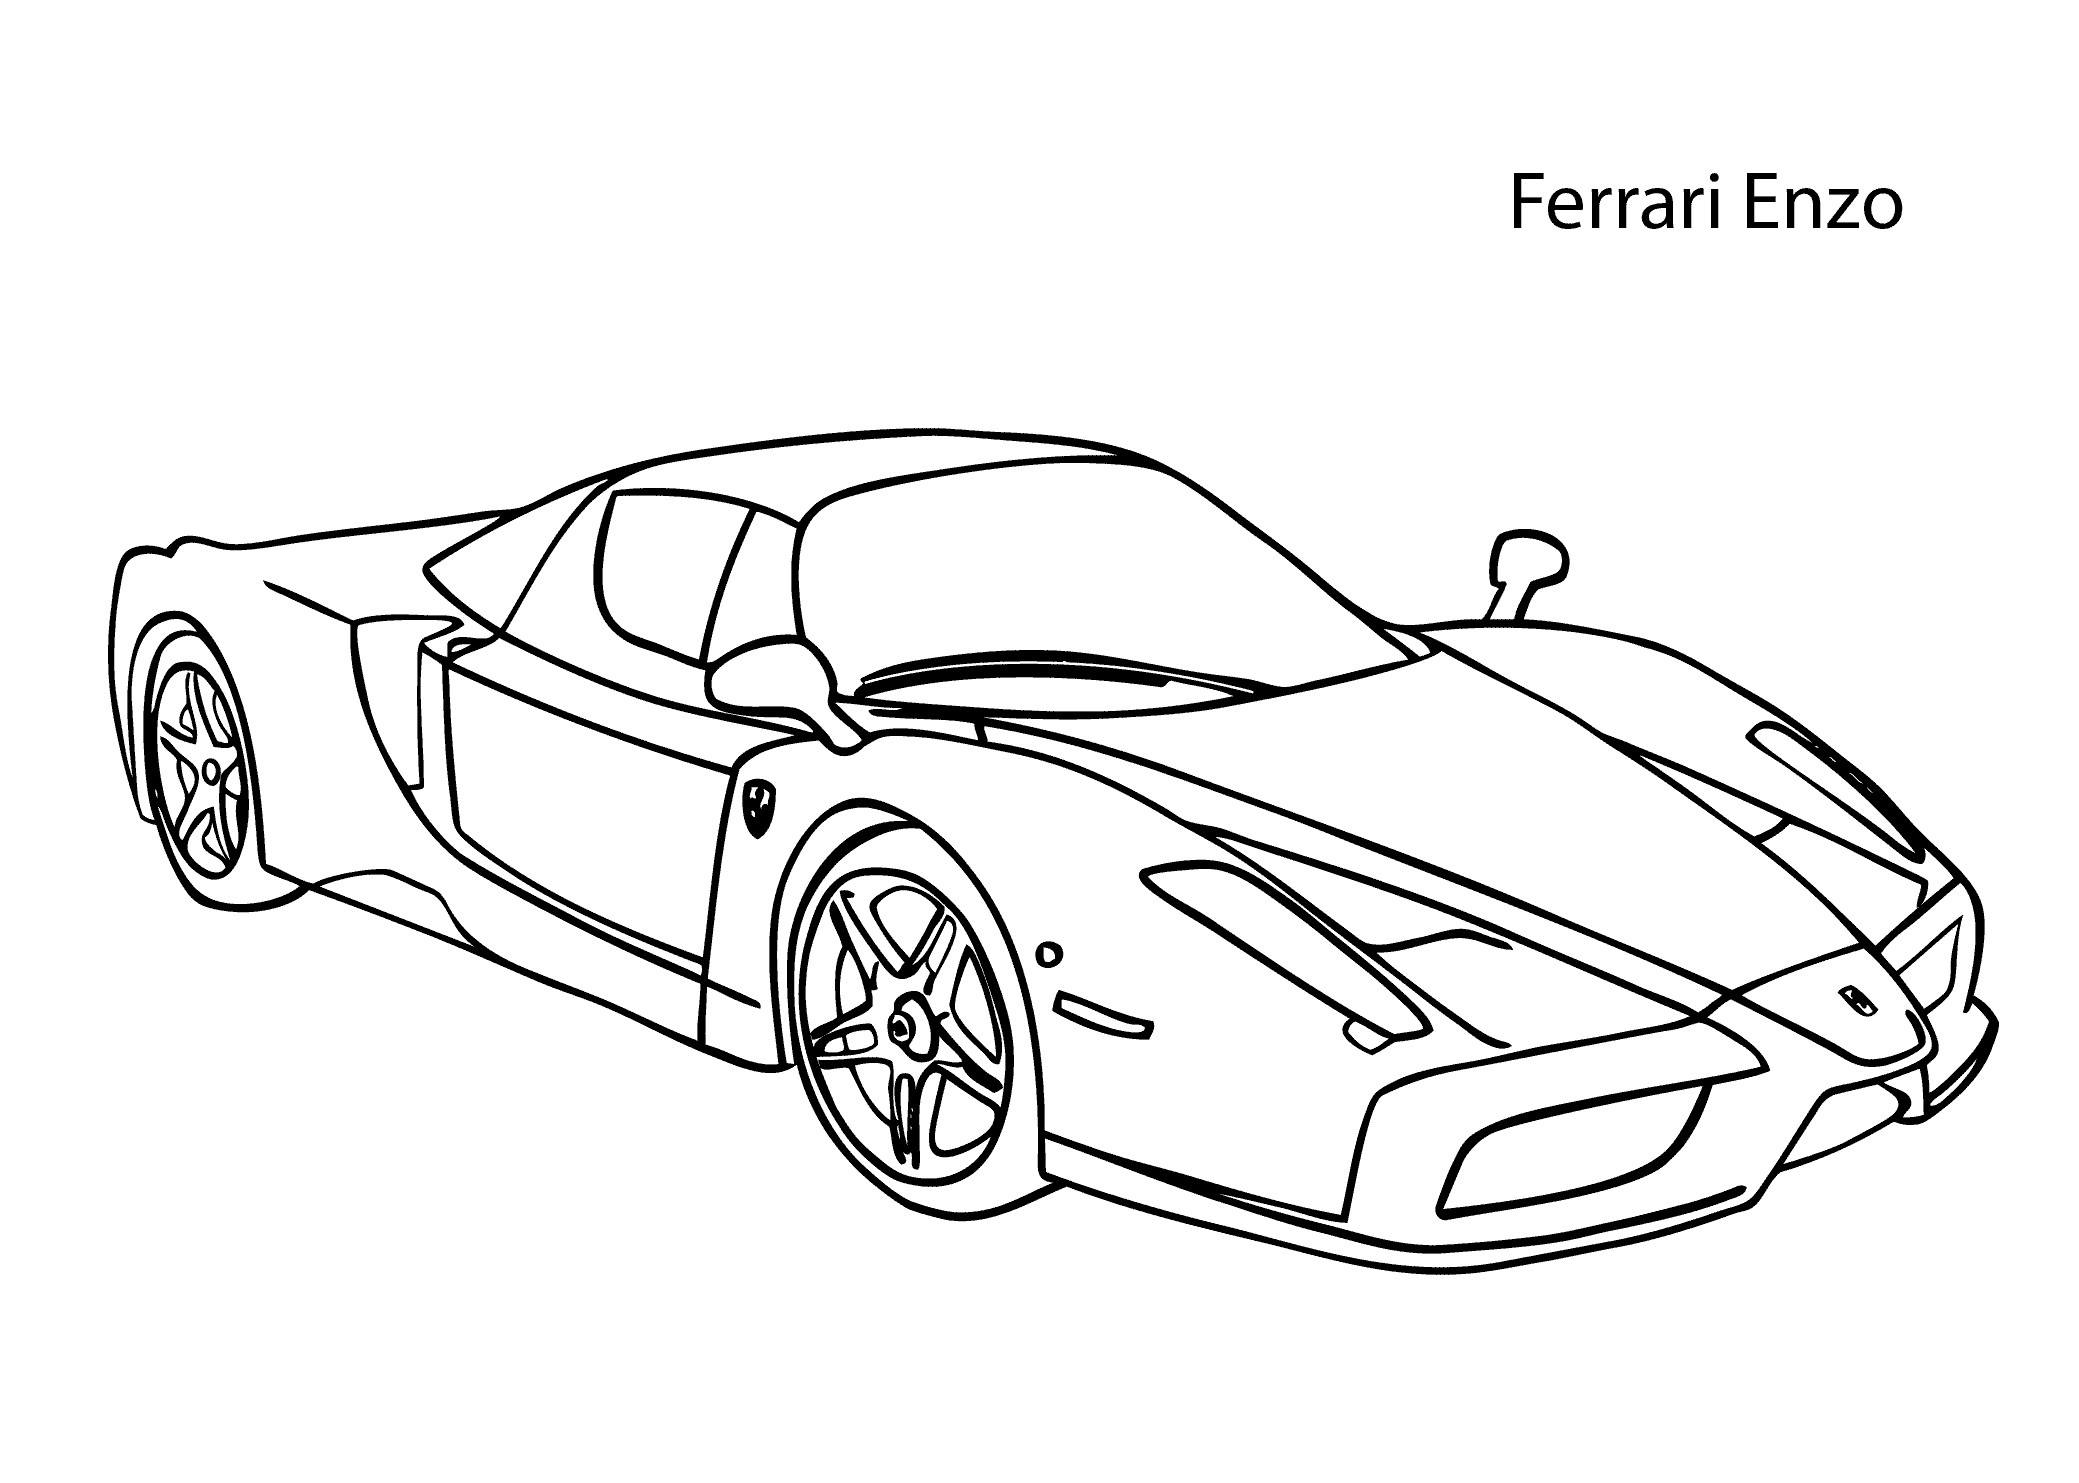 Coloring Pages For Boys Printable Cool Cars
 Cool Cars Coloring Pages For Boys – Color Bros